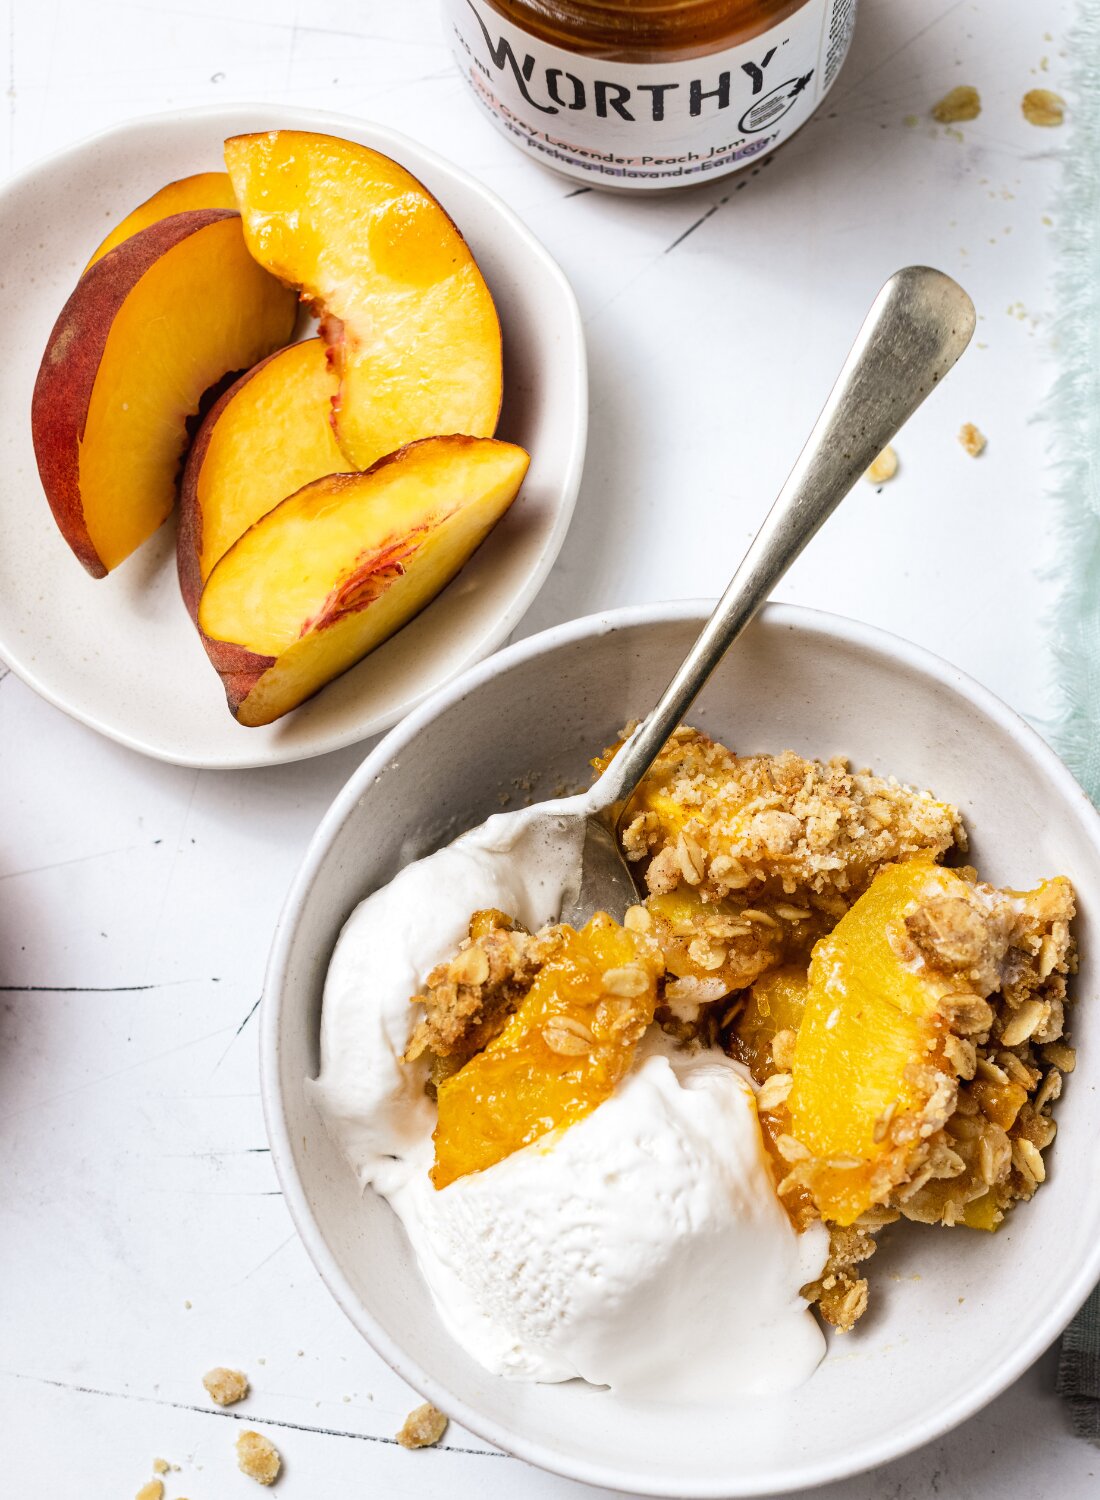 Baked peach crisp with Worthy’s Earl Grey Lavender jam filling in a bowl with vanilla ice cream next to a plate of peach slices.